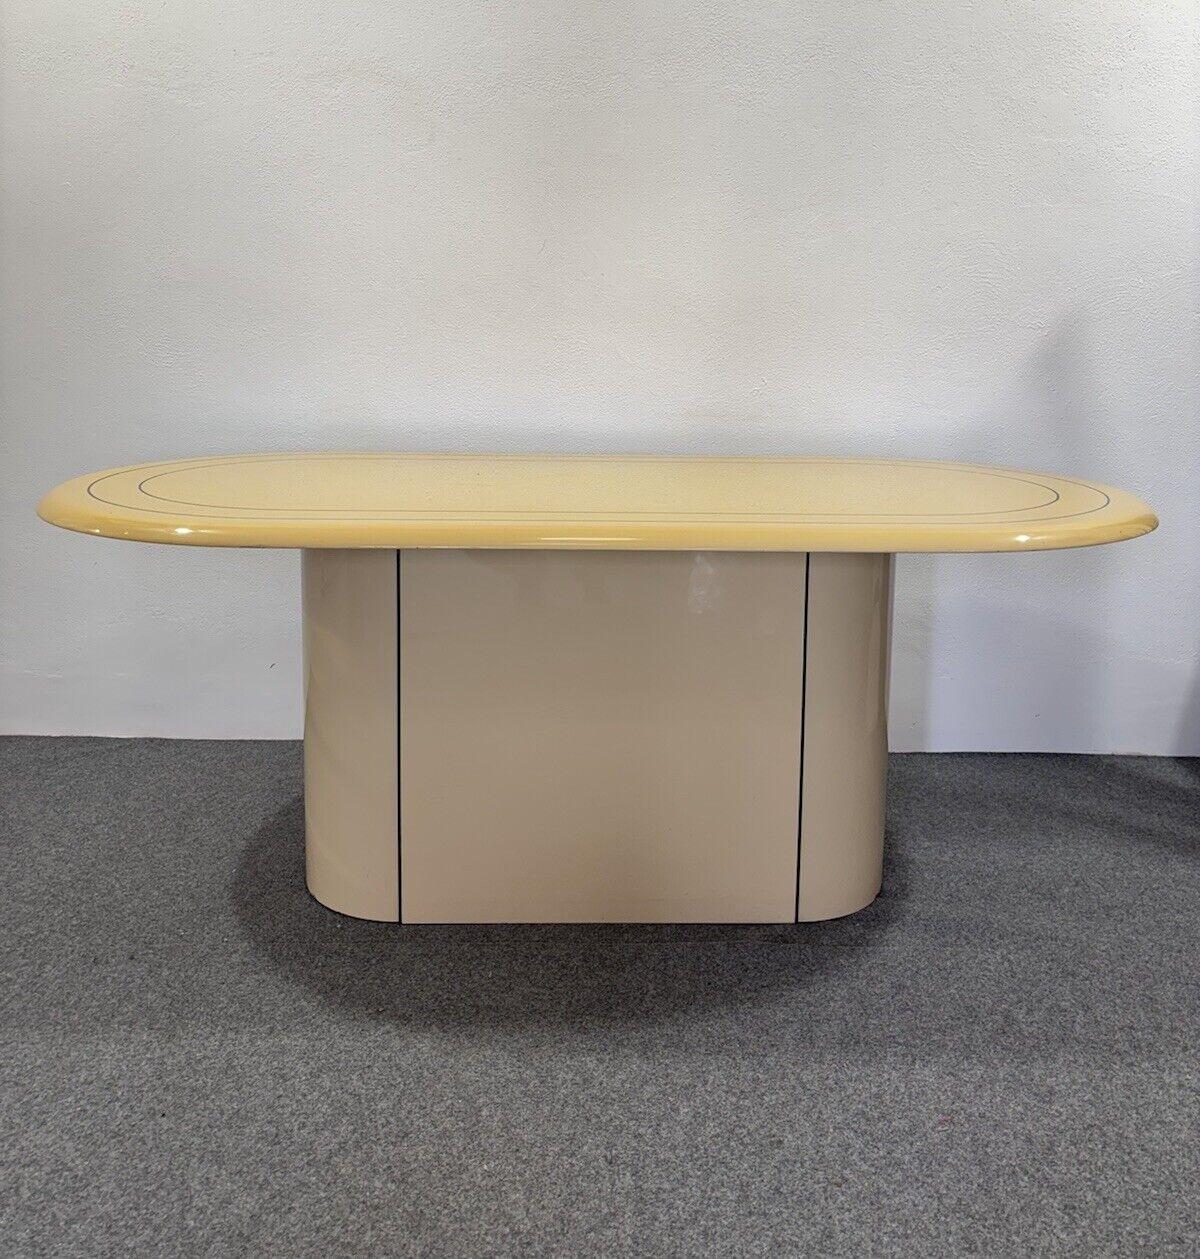 Pierre Cardin Style Dining Table Wooden Modern Design 1970s For Sale 6